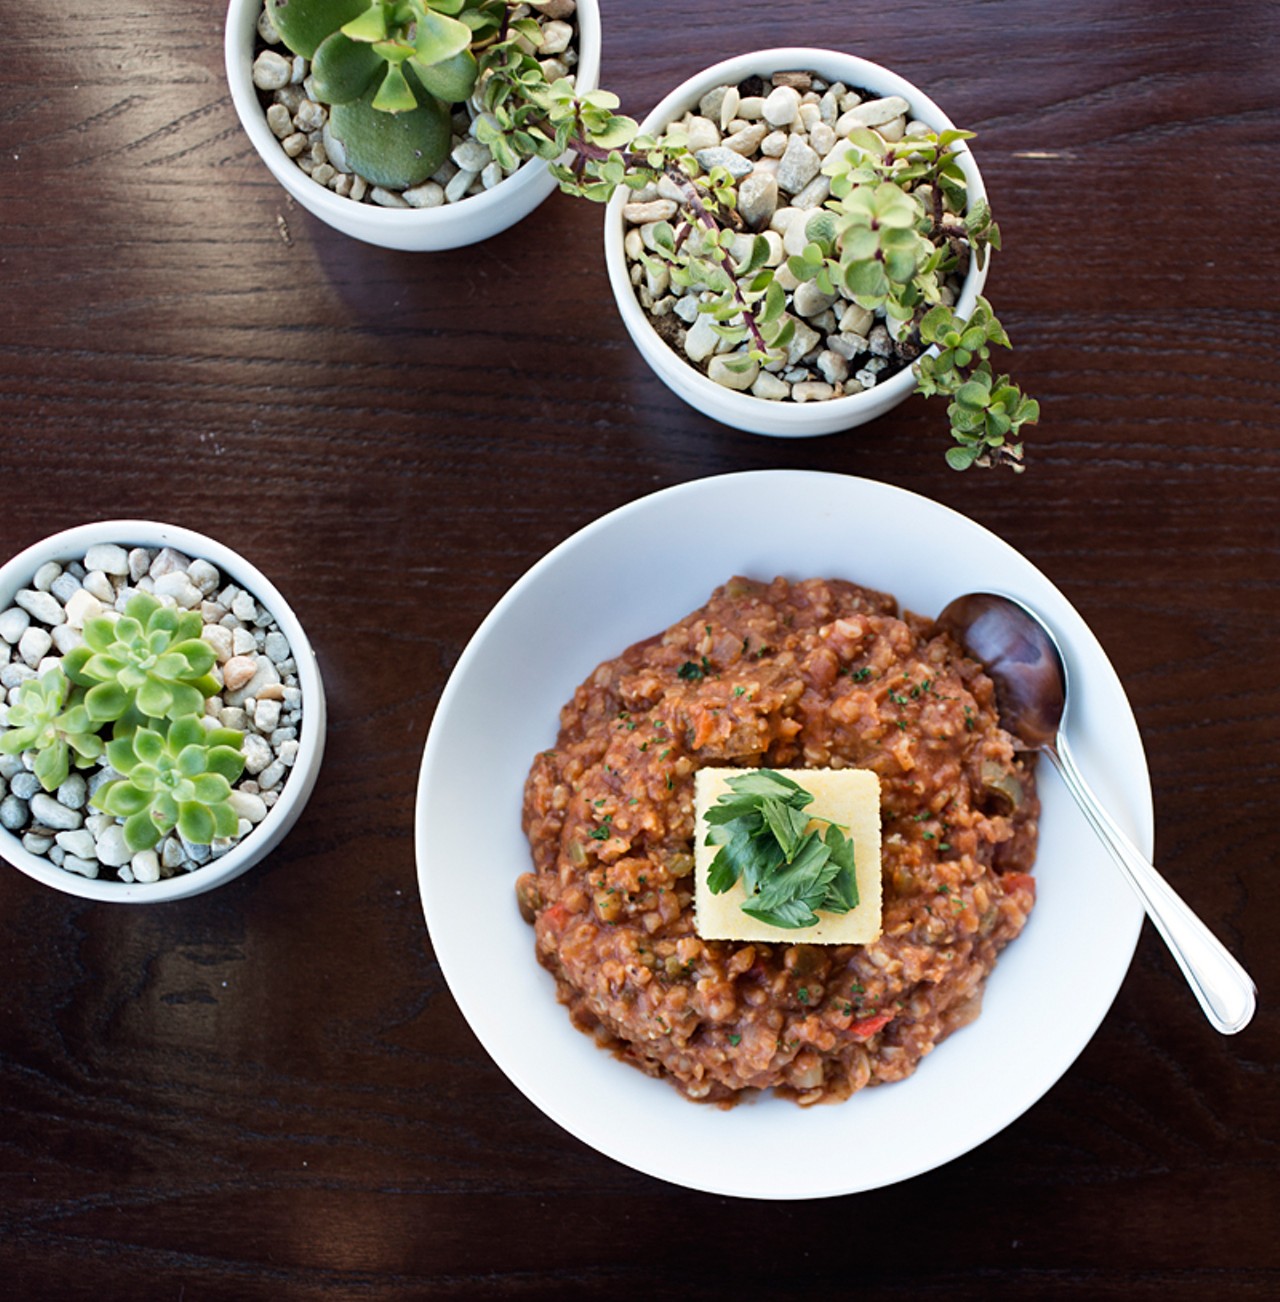 Like everything else here, the jambalaya is vegetarian, made with smoked spicy vegan sausage, brown rice, bell pepper, tomato, celery, garlic and onion, and served with cornbread.